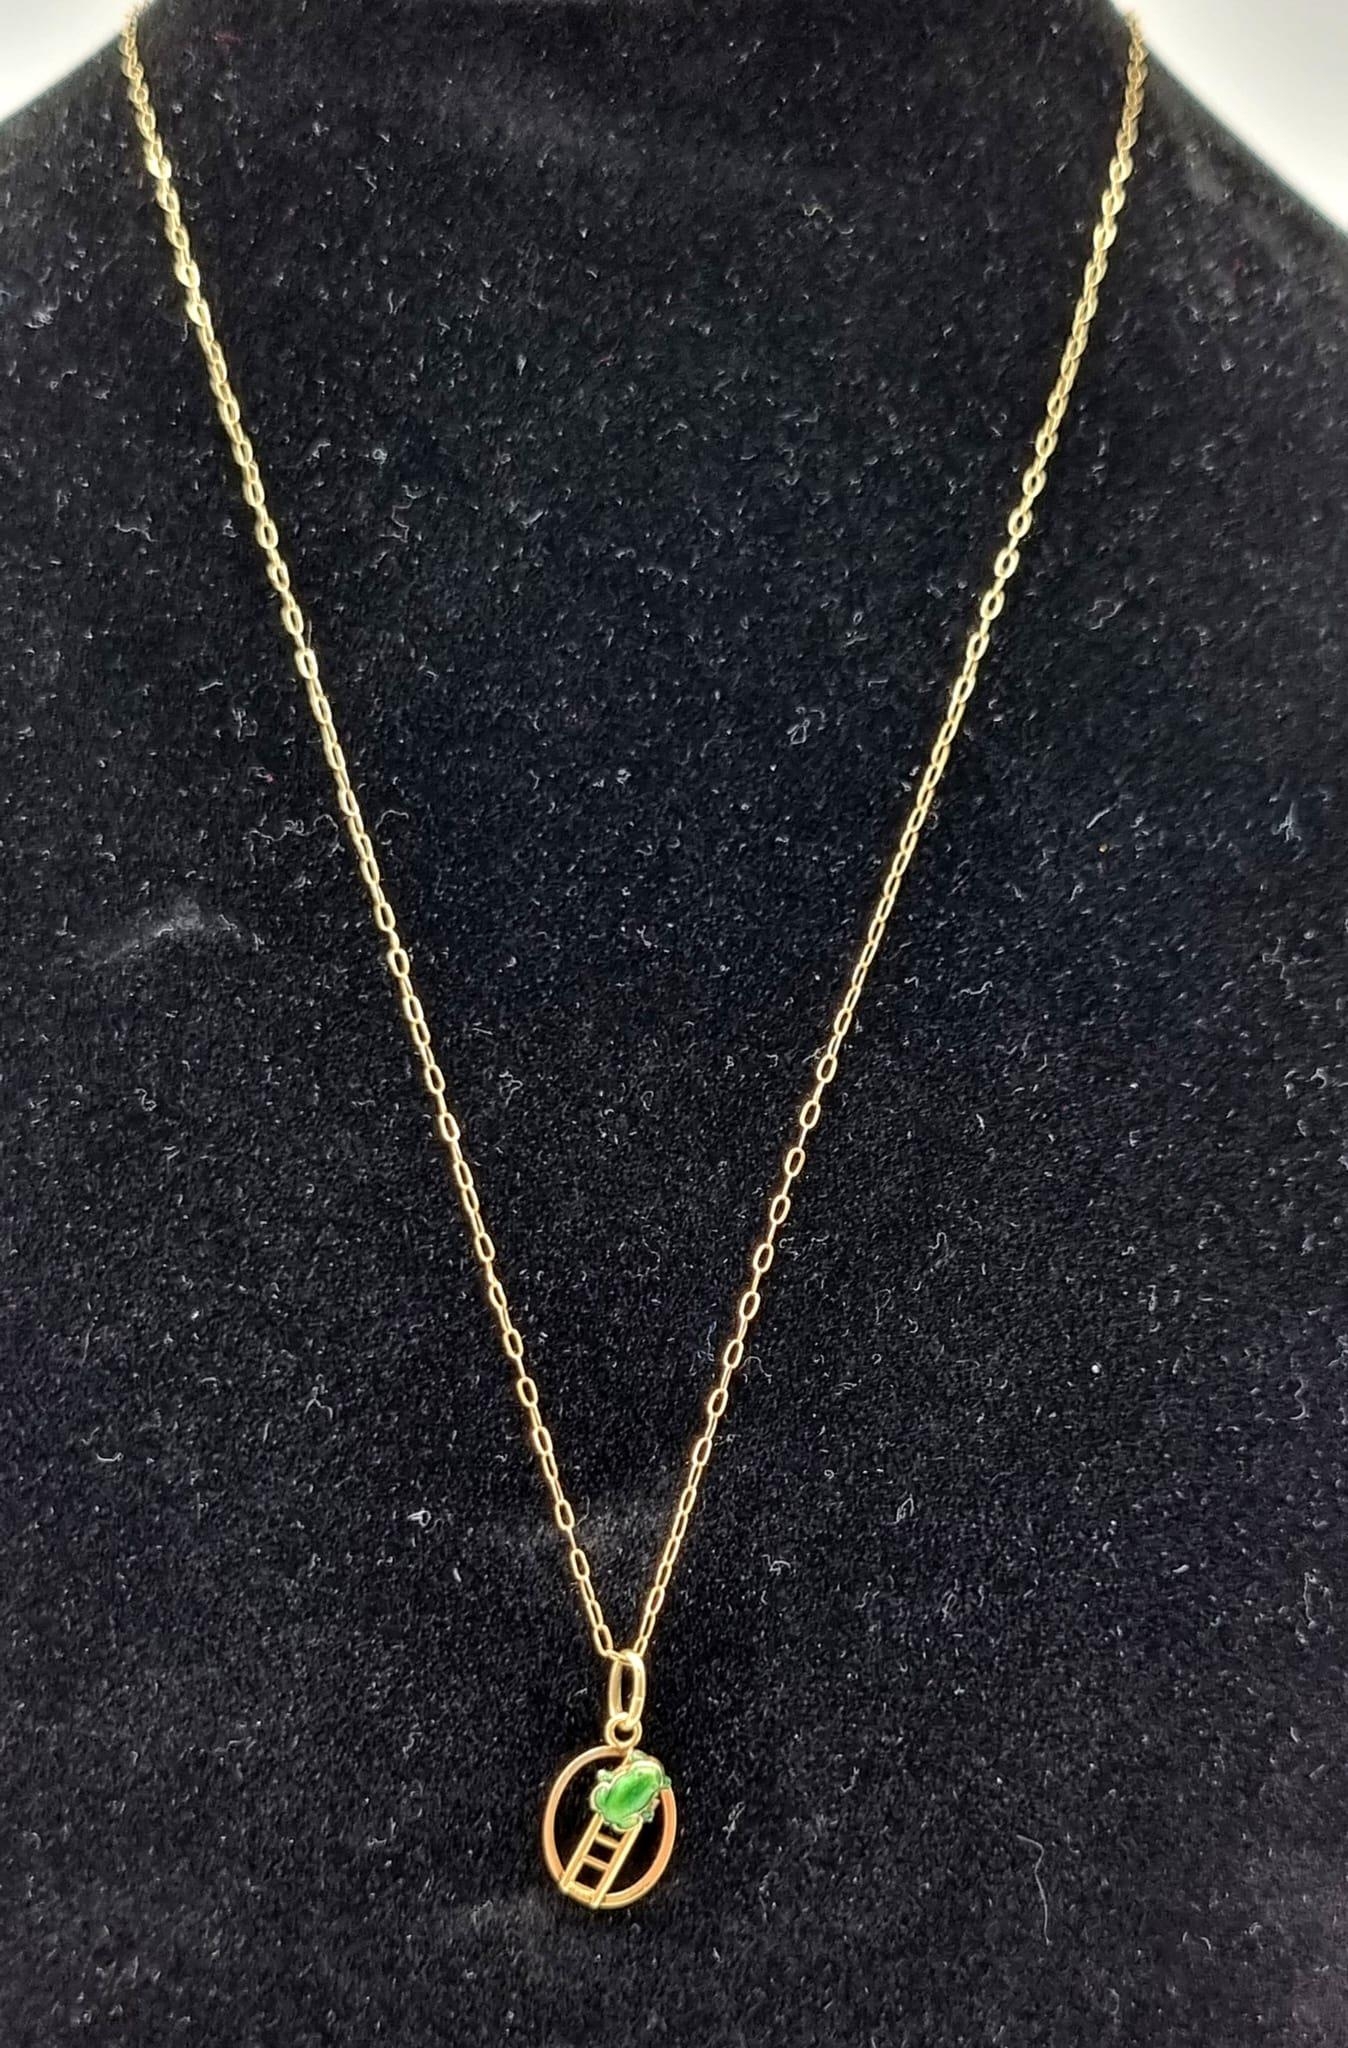 A 9K Yellow Gold Disappearing Necklace with Frog and Ladder Pendant. 44cm. 0.83g - Image 6 of 6